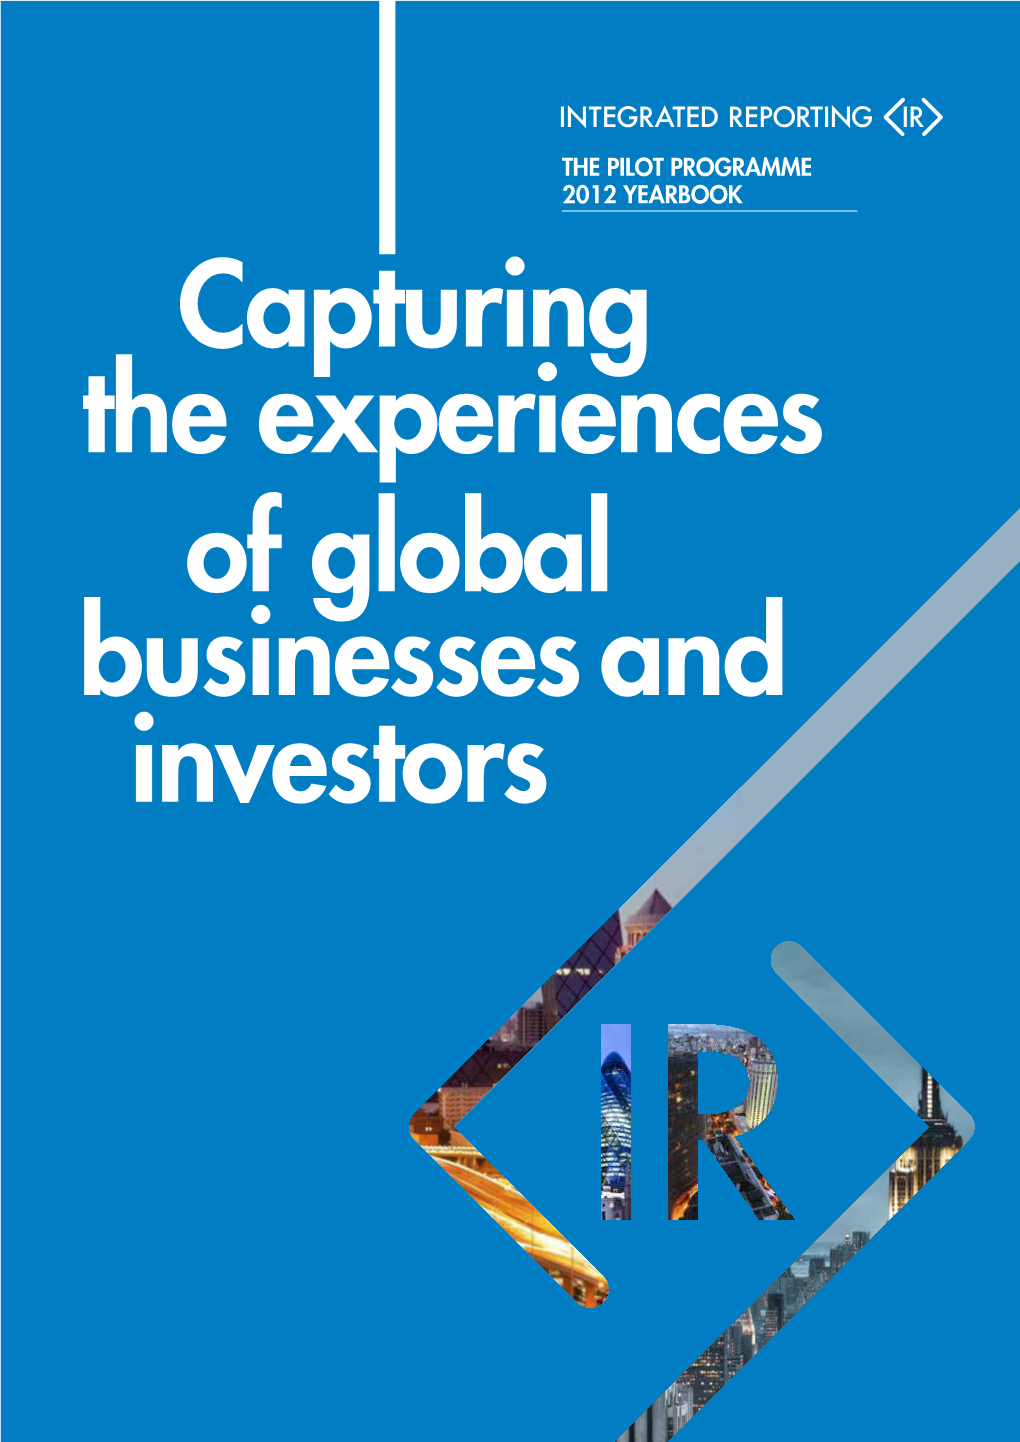 PILOT PROGRAMME 2012 YEARBOOK Capturing the Experiences of Global Businesses and Investors About the IIRC